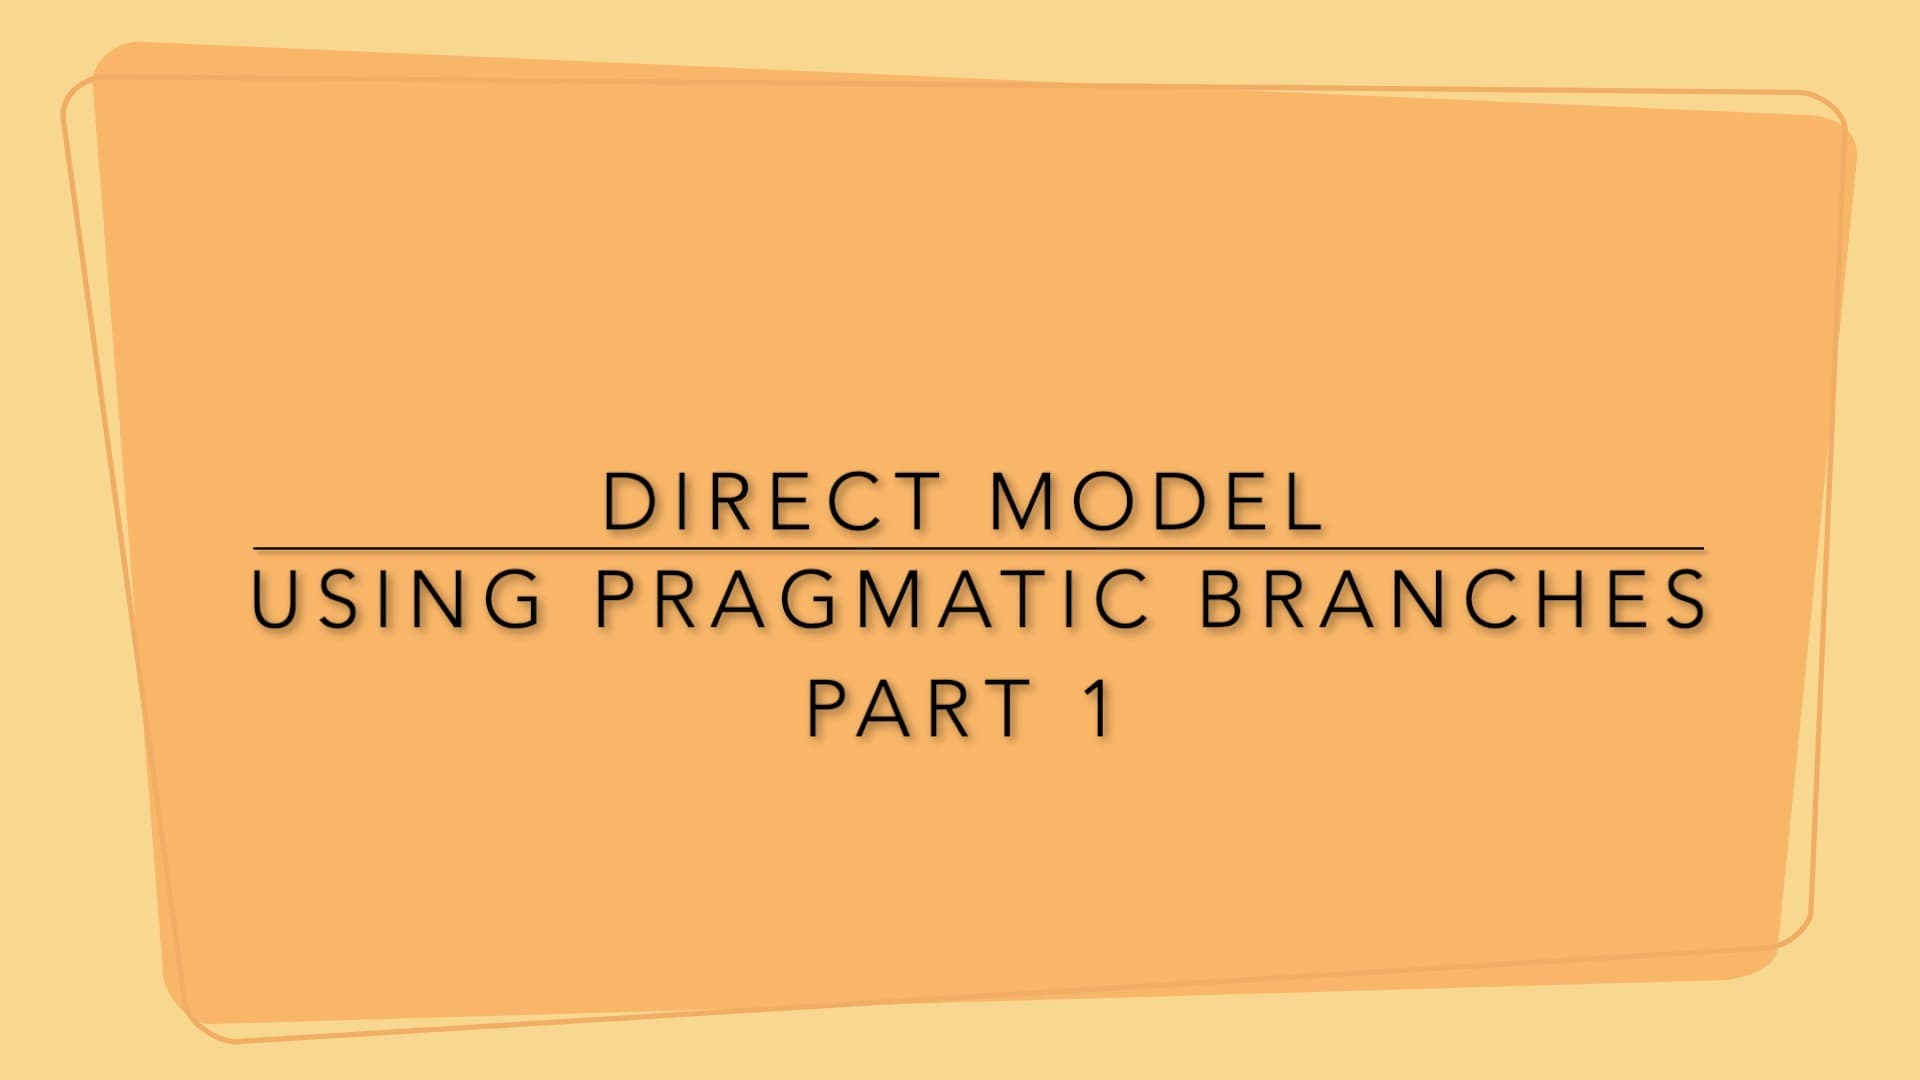 A Step-by-Step Guide to Doing a Direct Model of Pragmatic Branches within a PODD book Part 1